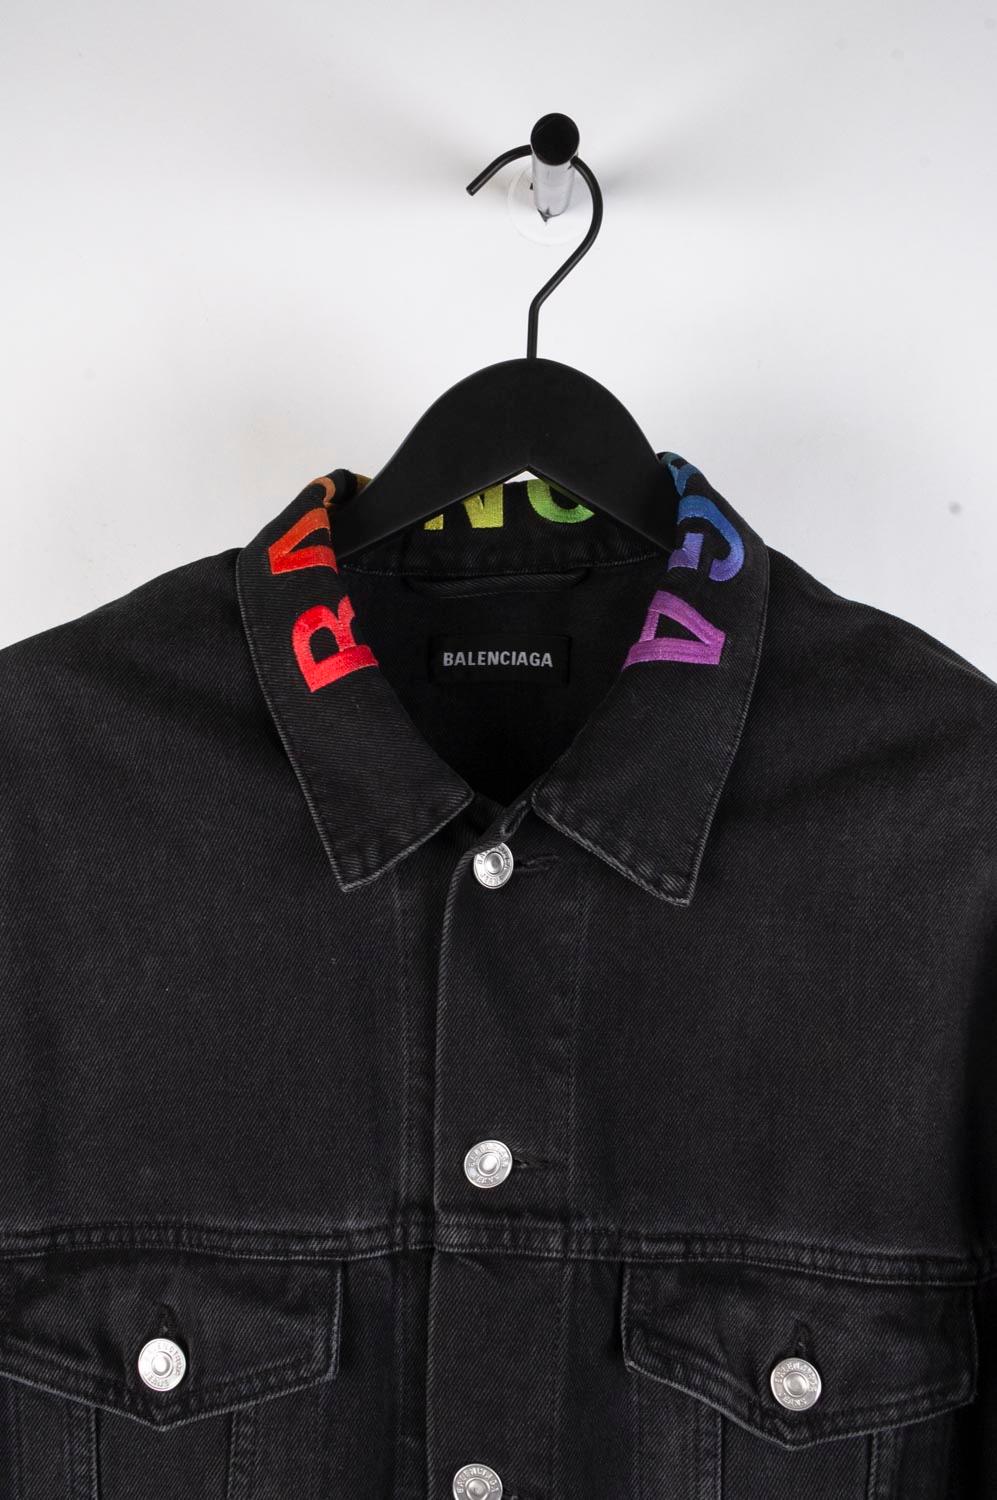 Item for sale is 100% genuine Balenciaga Denim Men Jacket, S469
Color: Black
(An actual color may a bit vary due to individual computer screen interpretation)
Material: 100% cotton
Tag size: 44  runs Large
This jacket is great quality item. Rate 9